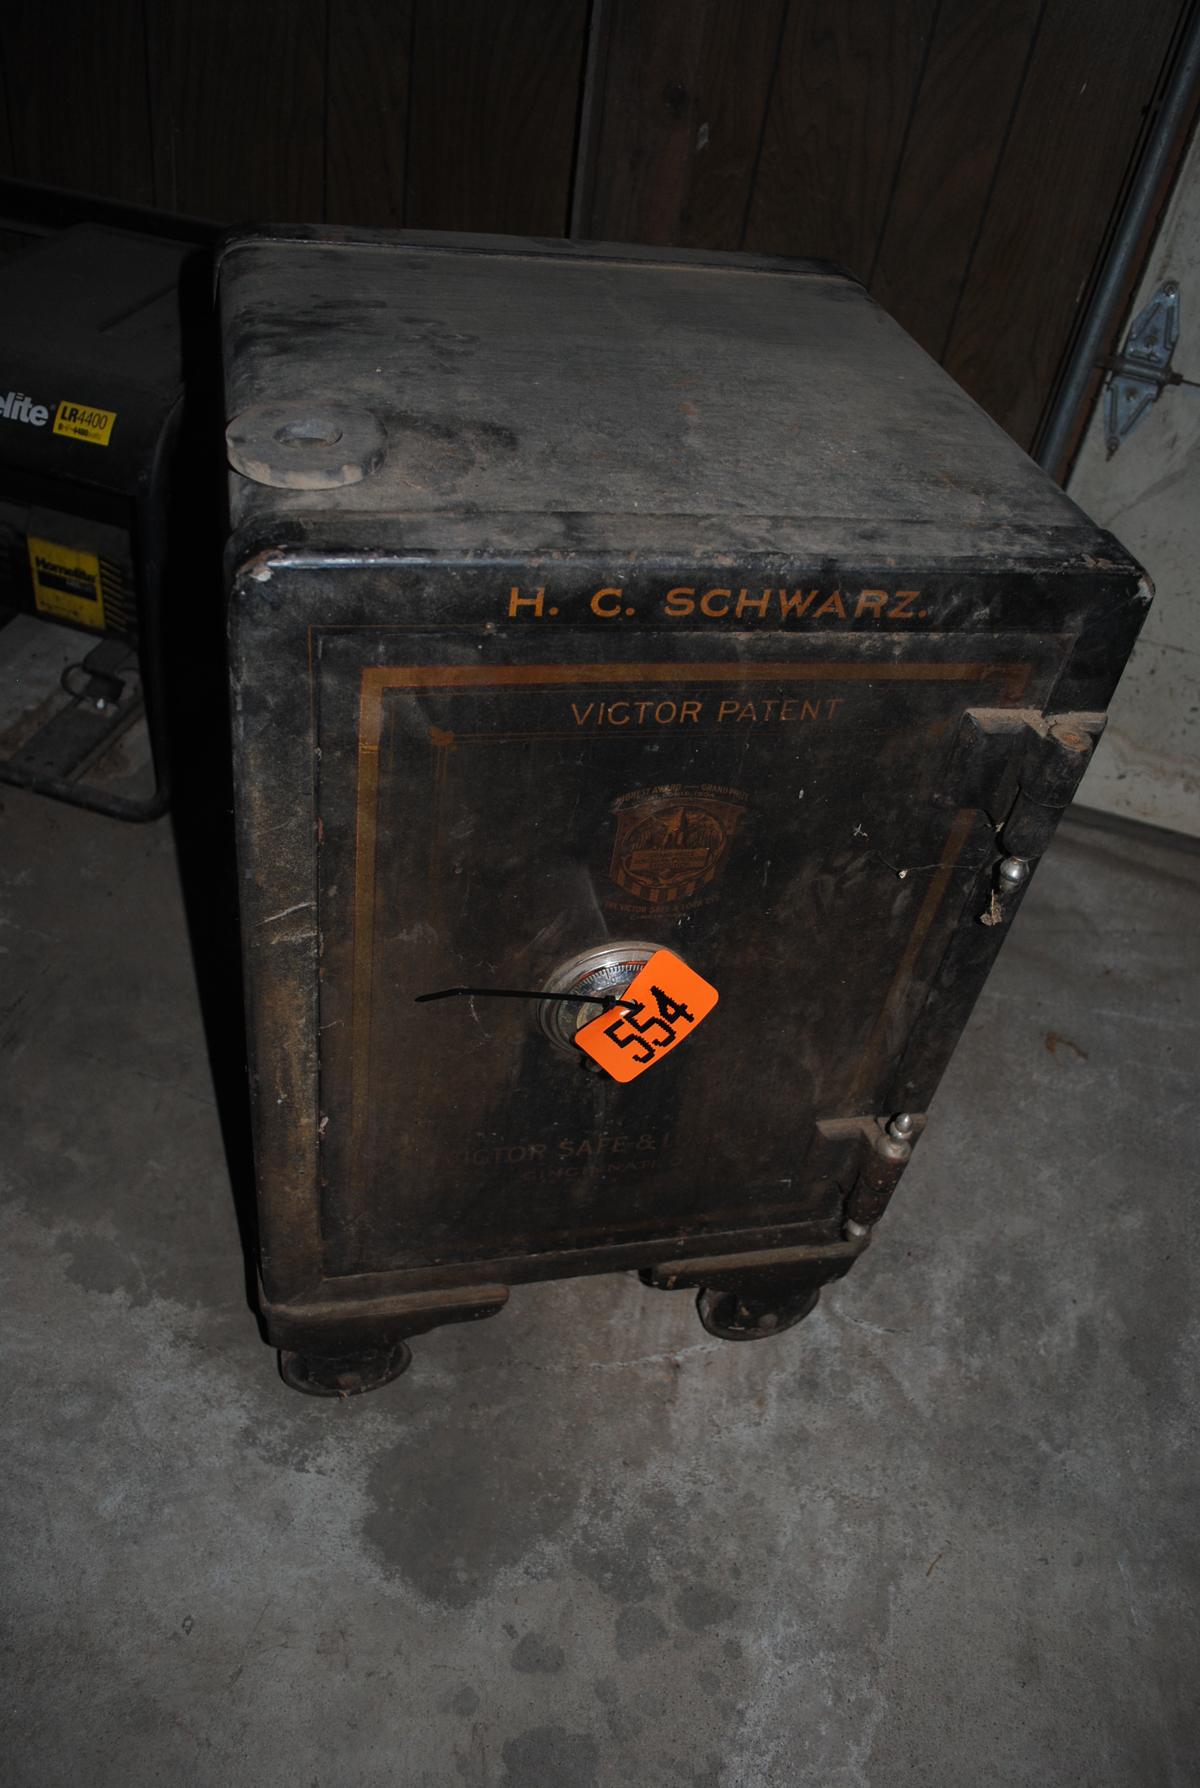 Victor Safe & Lock Company safe on wheels, safe is closed and combination is unknown